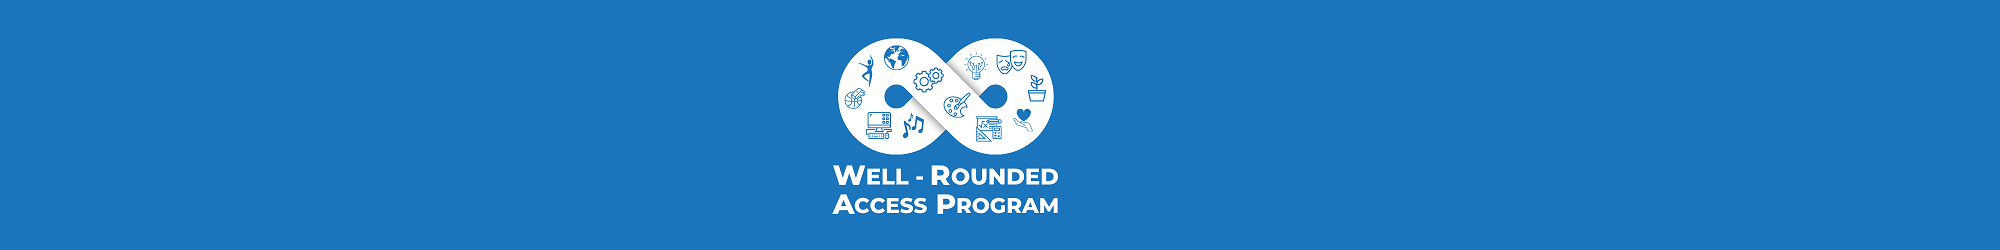 Well-Rounded Access Program Banner